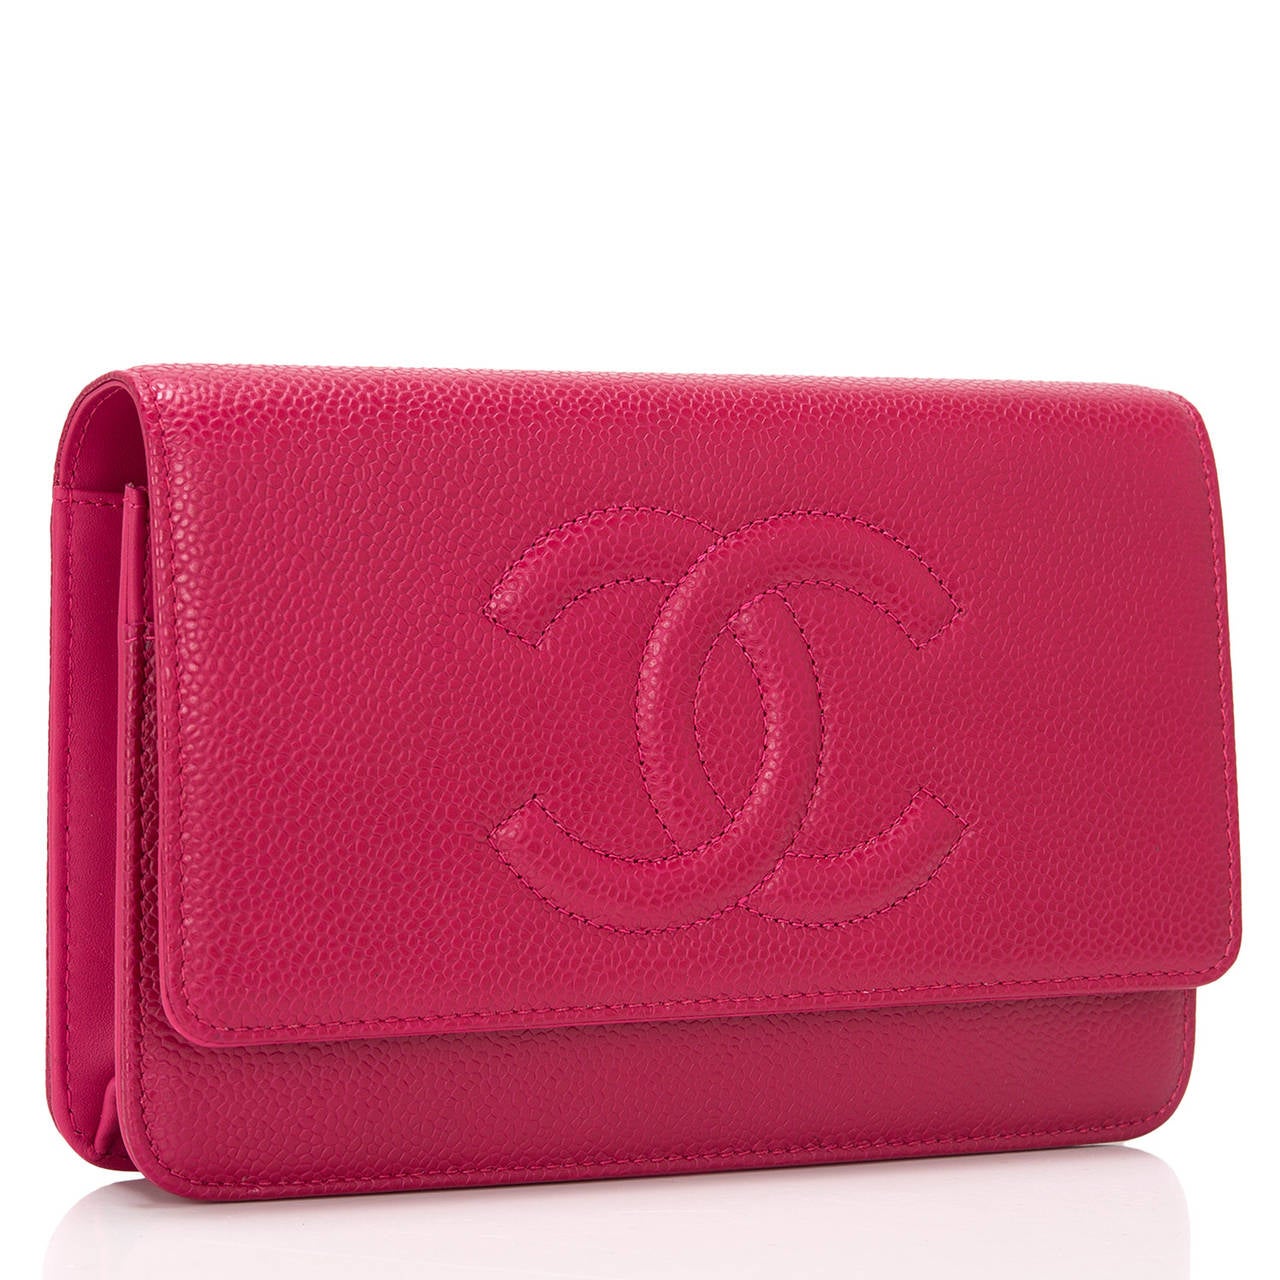 This Timeless Wallet On Chain (WOC) in a dark pink caviar with silver tone hardware features a front flap with tonal stitched large CC, hidden snap closure, expandable sides and bottom, and interwoven silver tone and dark pink leather